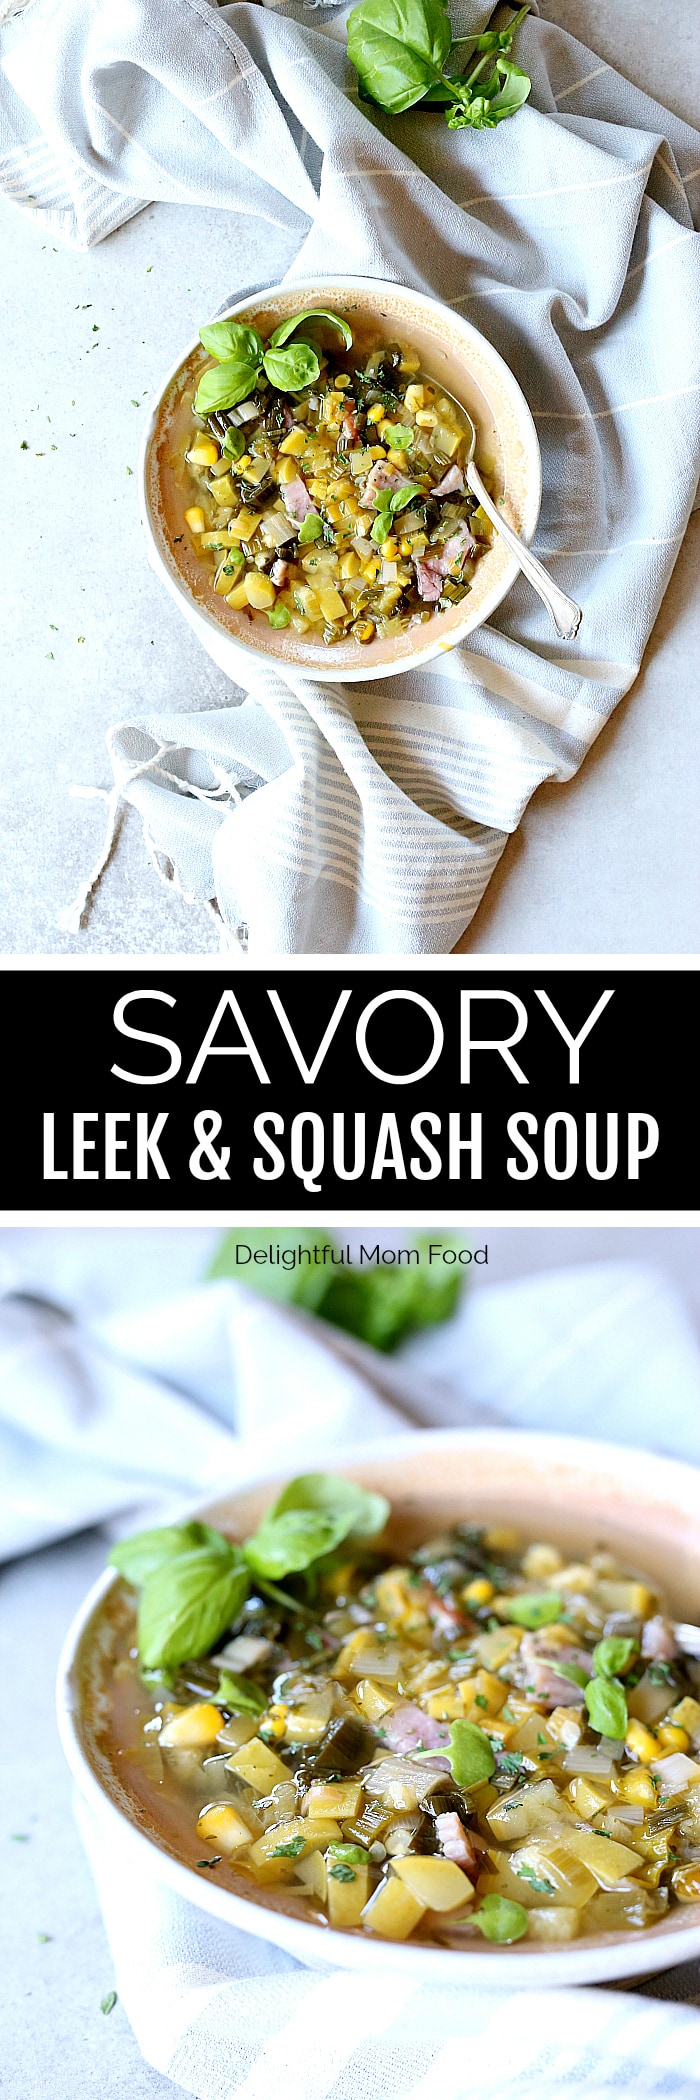 Healthy and fresh leek soup with bold flavors of salty ham, hints of sweet corn and yellow squash in a light yet filling broth. #soup #leeks #healthy #light #easy #recipe #ham #squash | delightfulmomfood.com